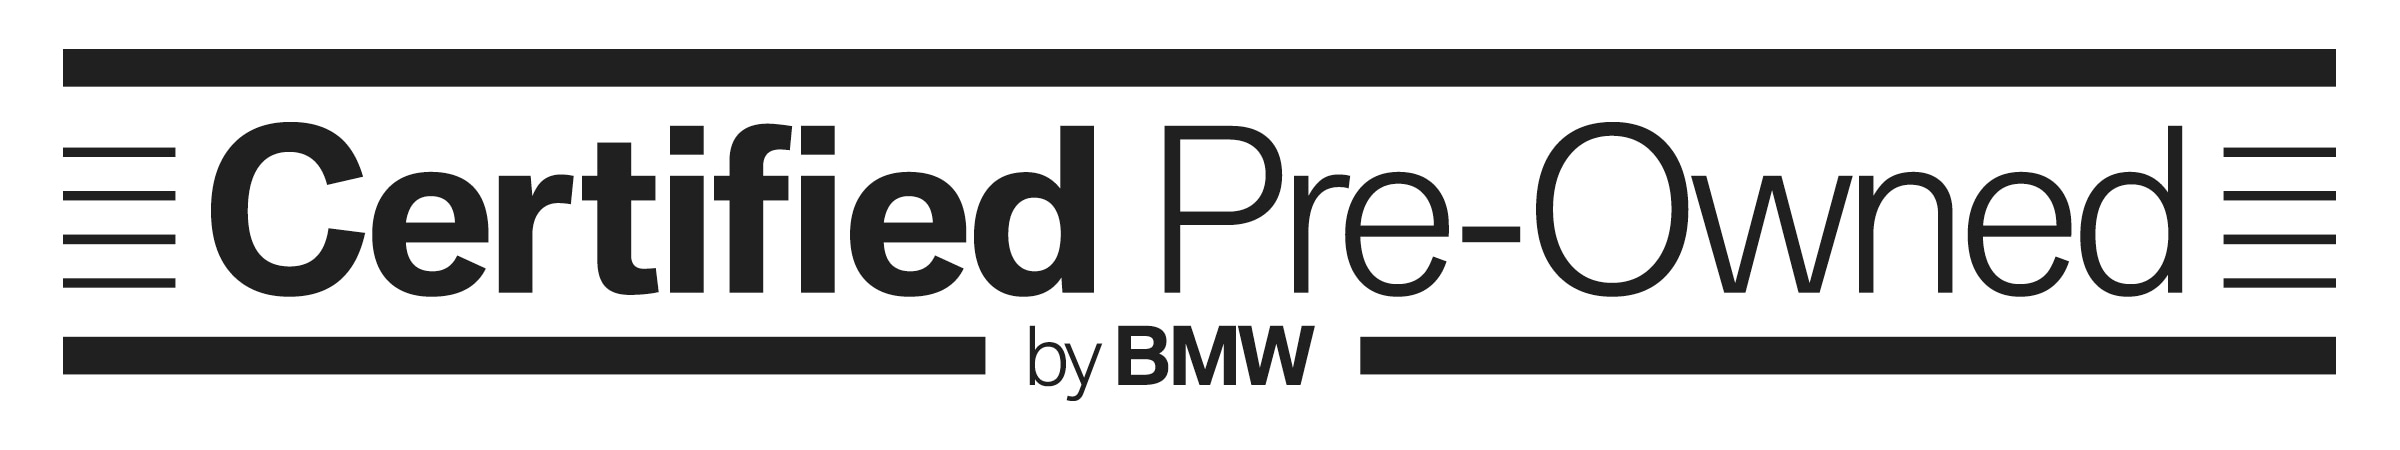 Bmw pre-owned certification